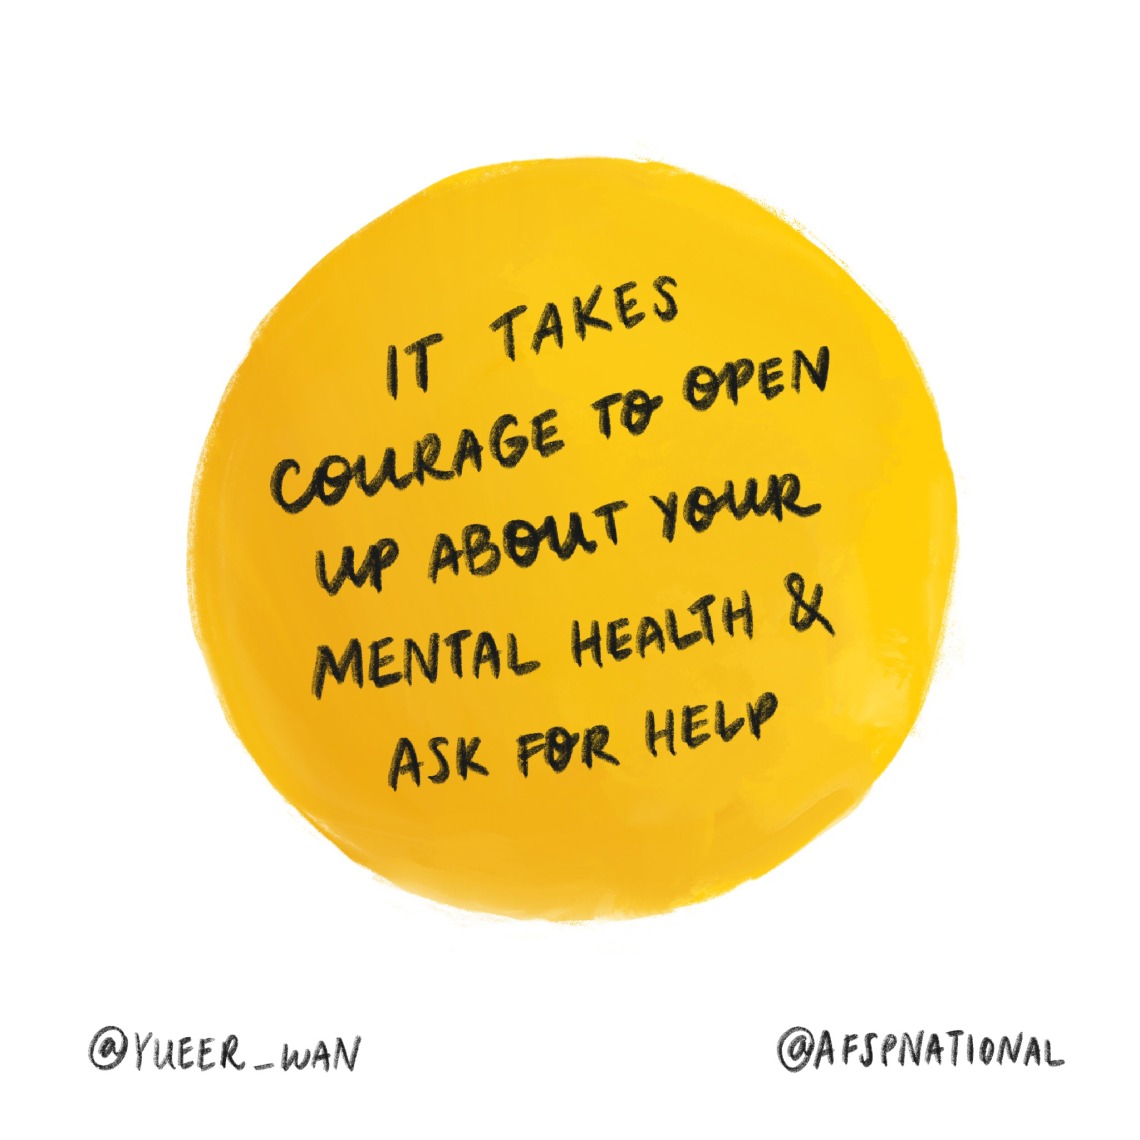 Text: it takes courage to open up about your mental health and ask for help